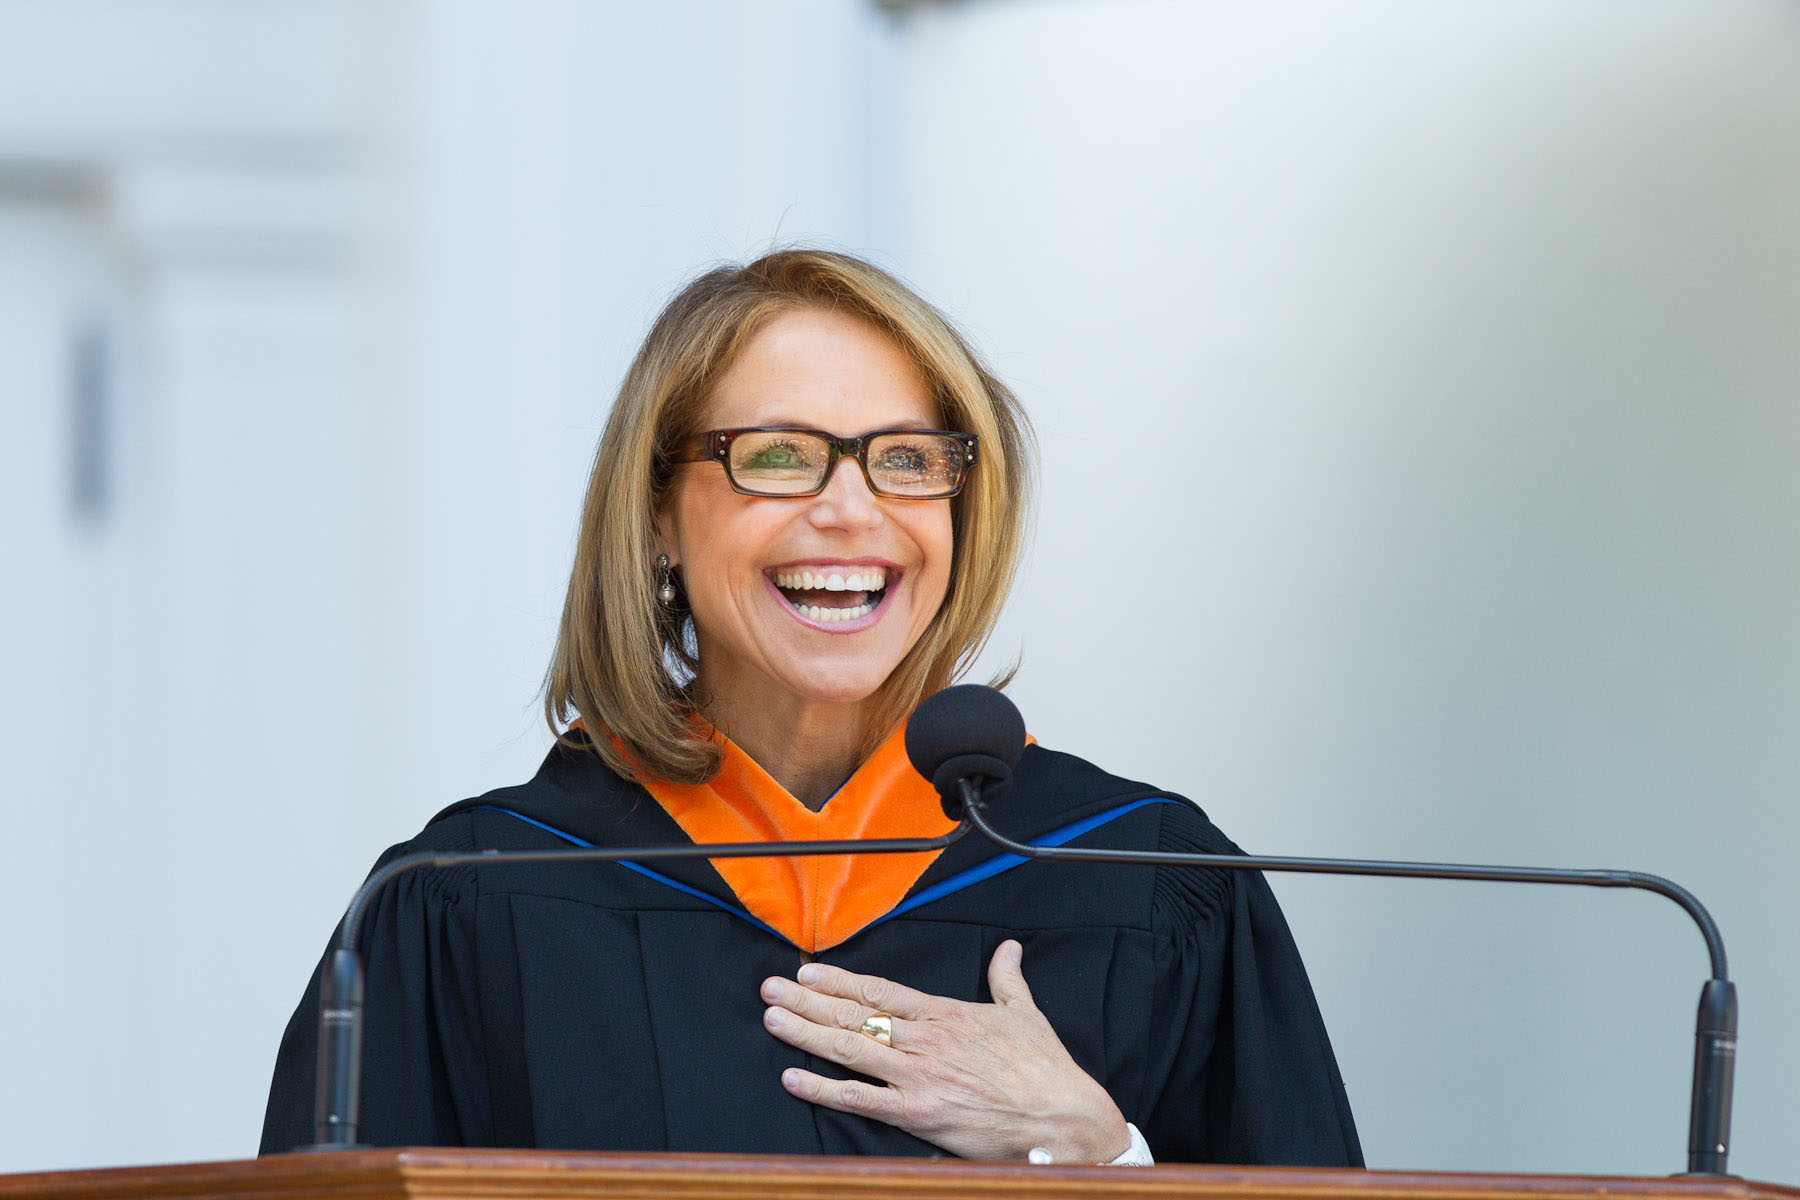 Katie Couric speaking from a podium at graduation